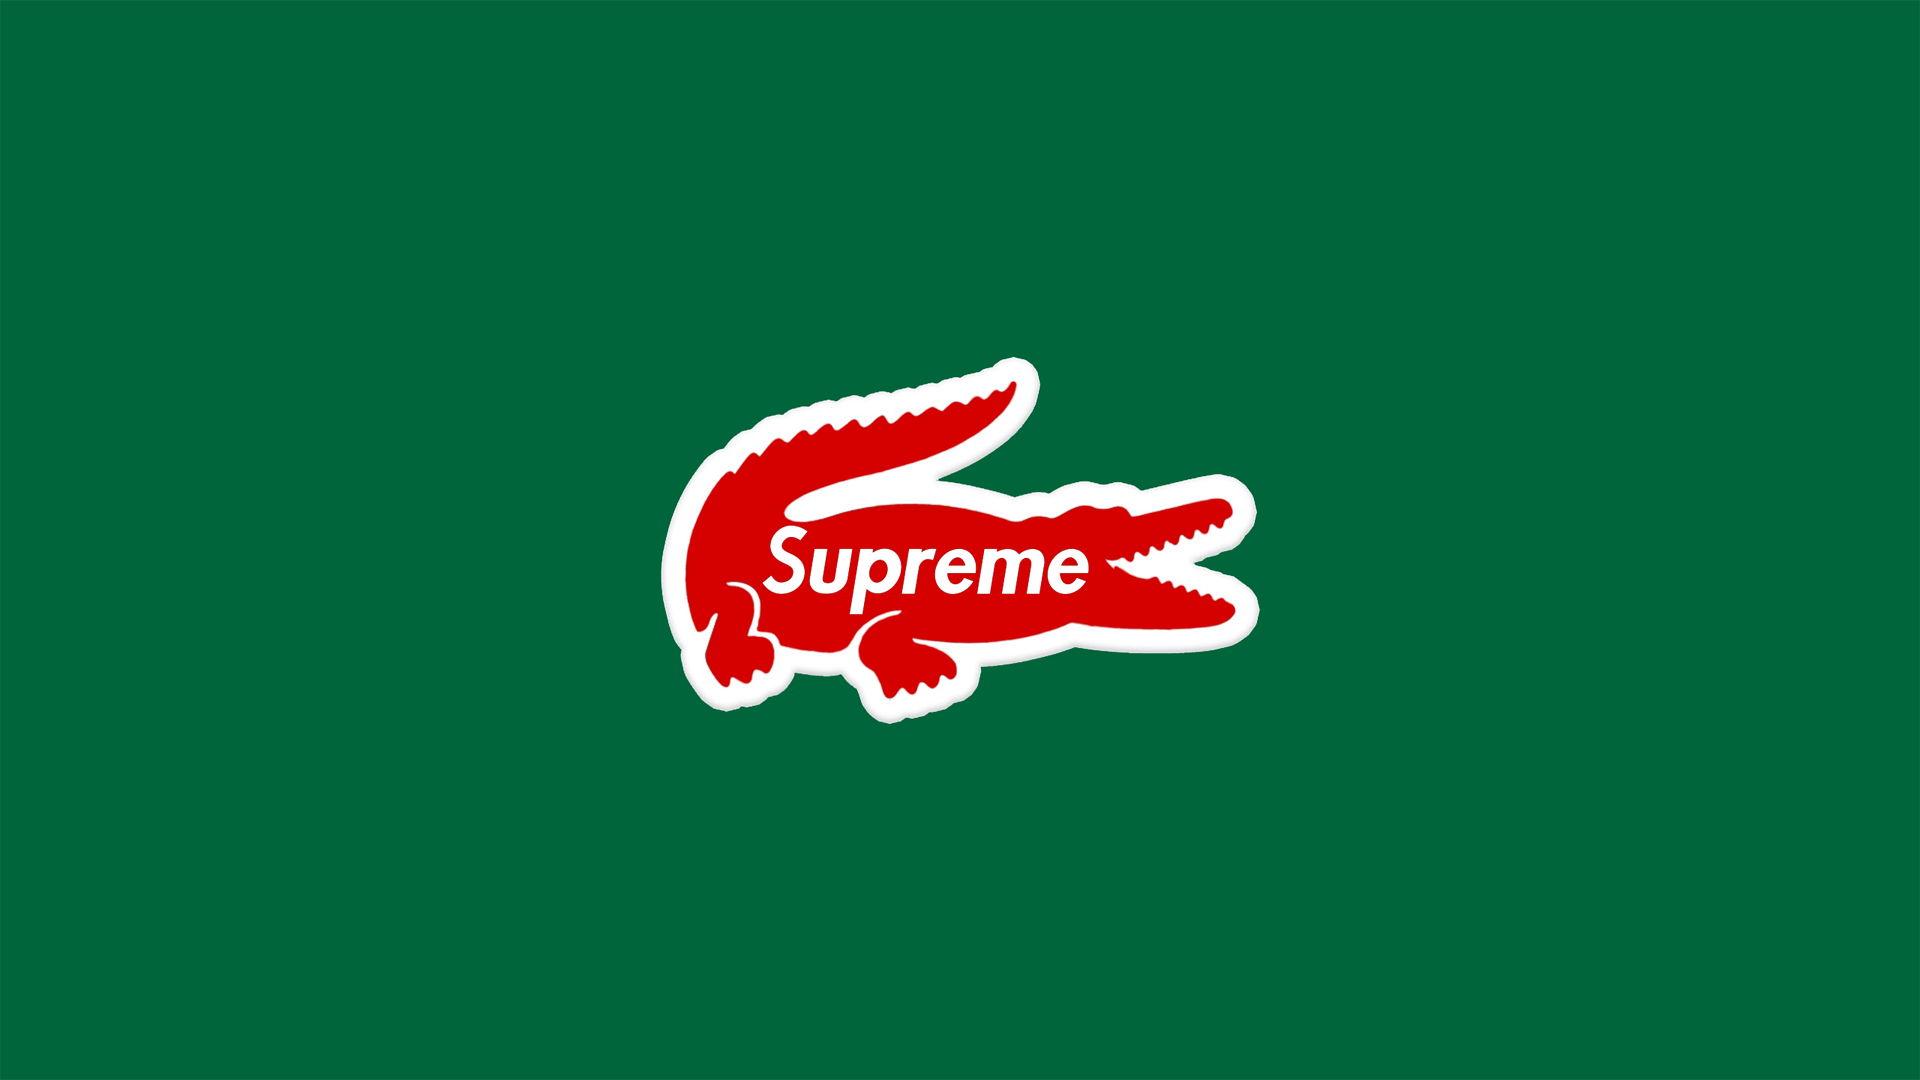 Gucci Supreme wallpaper by TrillyReign - Download on ZEDGE™